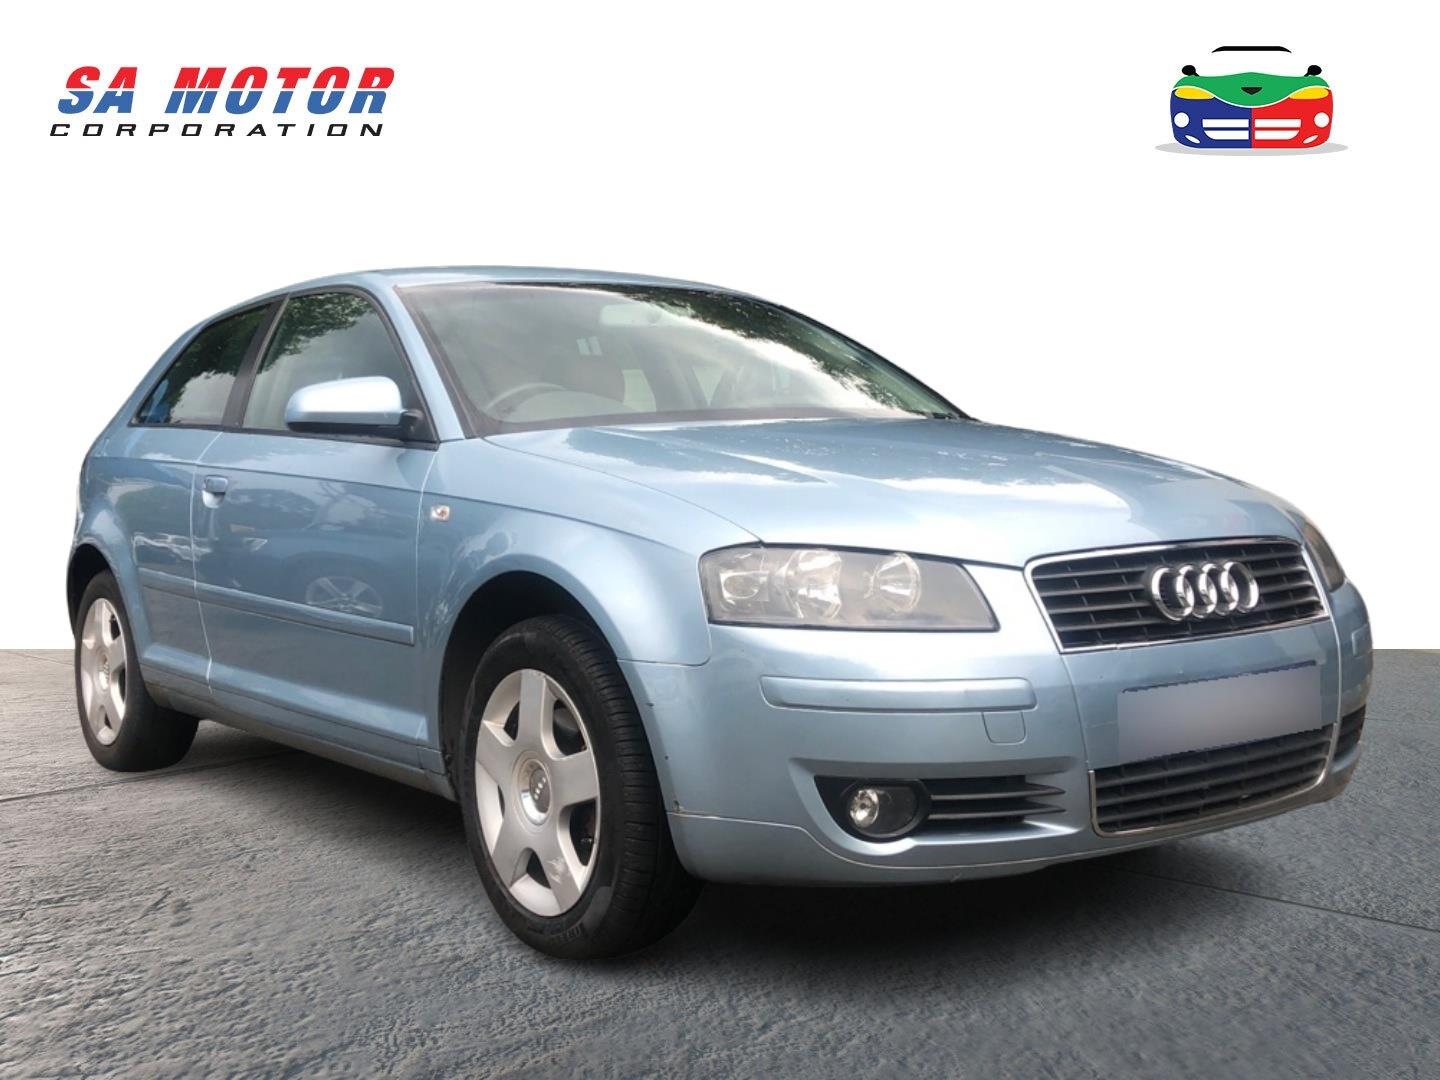 2005 Audi A3 2.0 Fsi Ambition Tip for sale - 324557